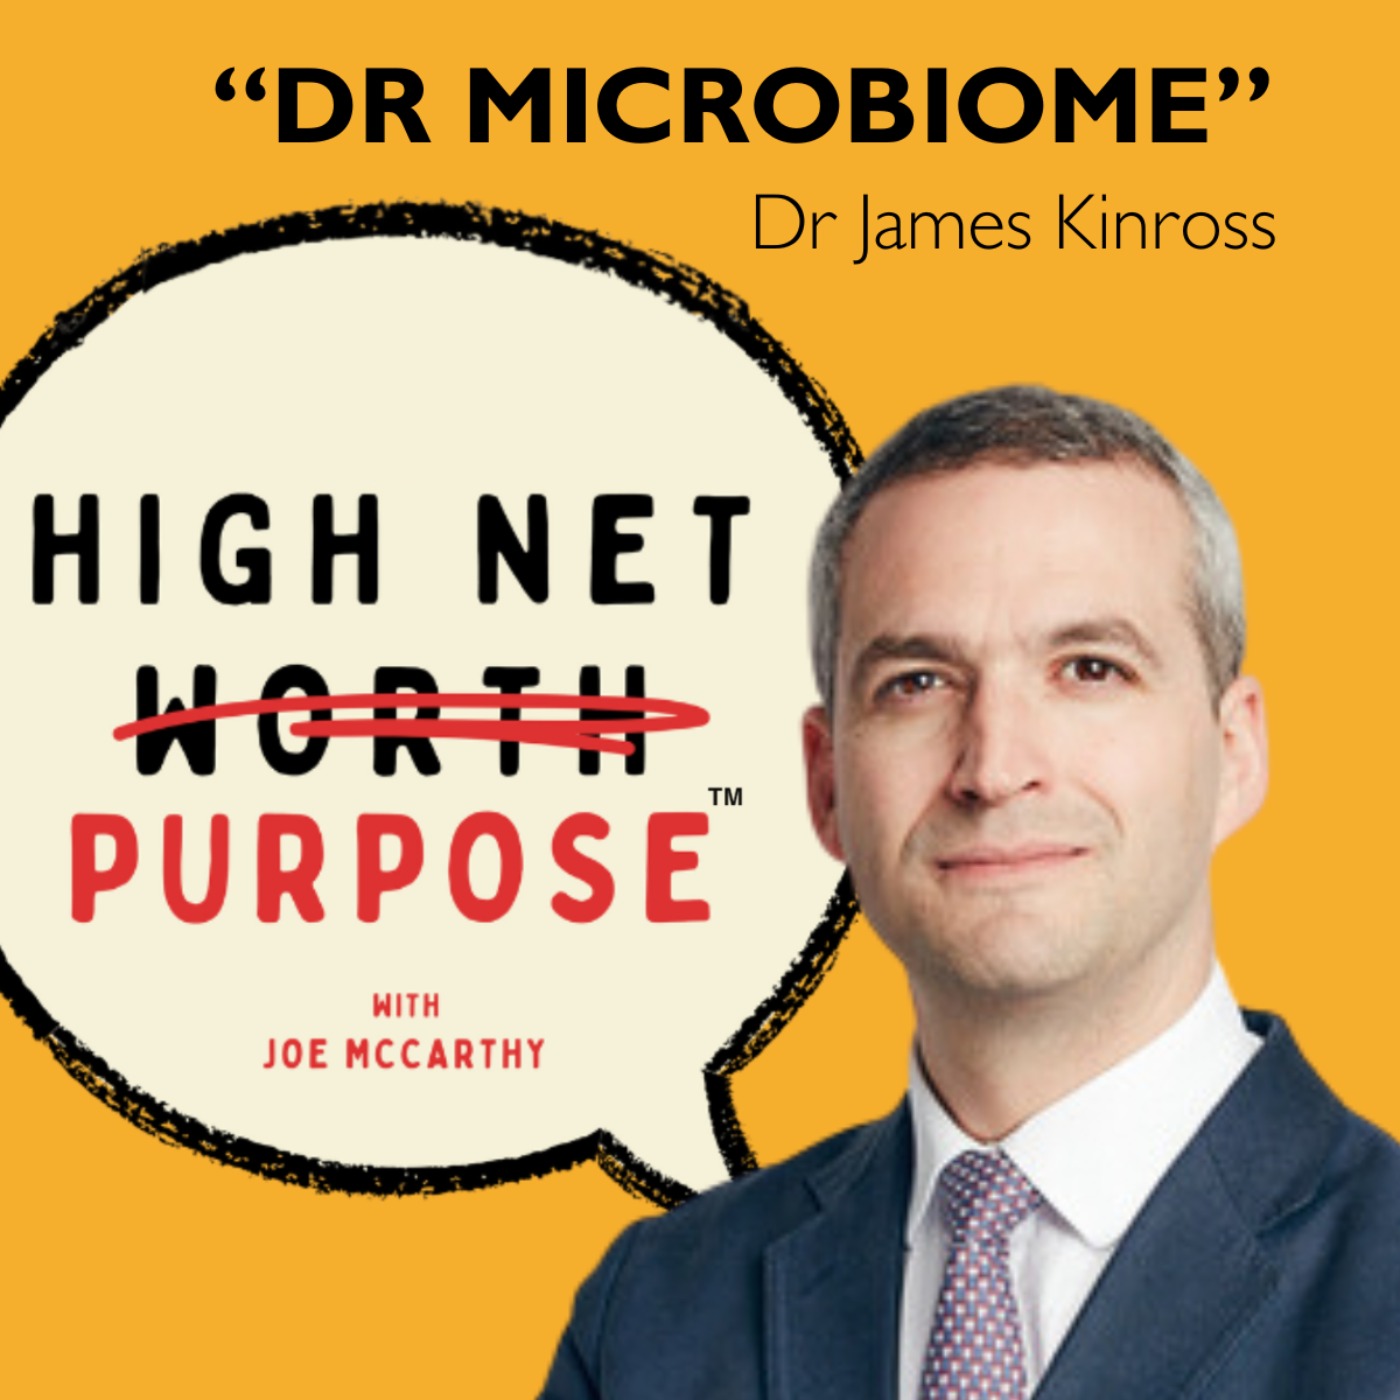 cover art for High Net Purpose: Dr James Kinross, Imperial College London "Dr Microbiome"